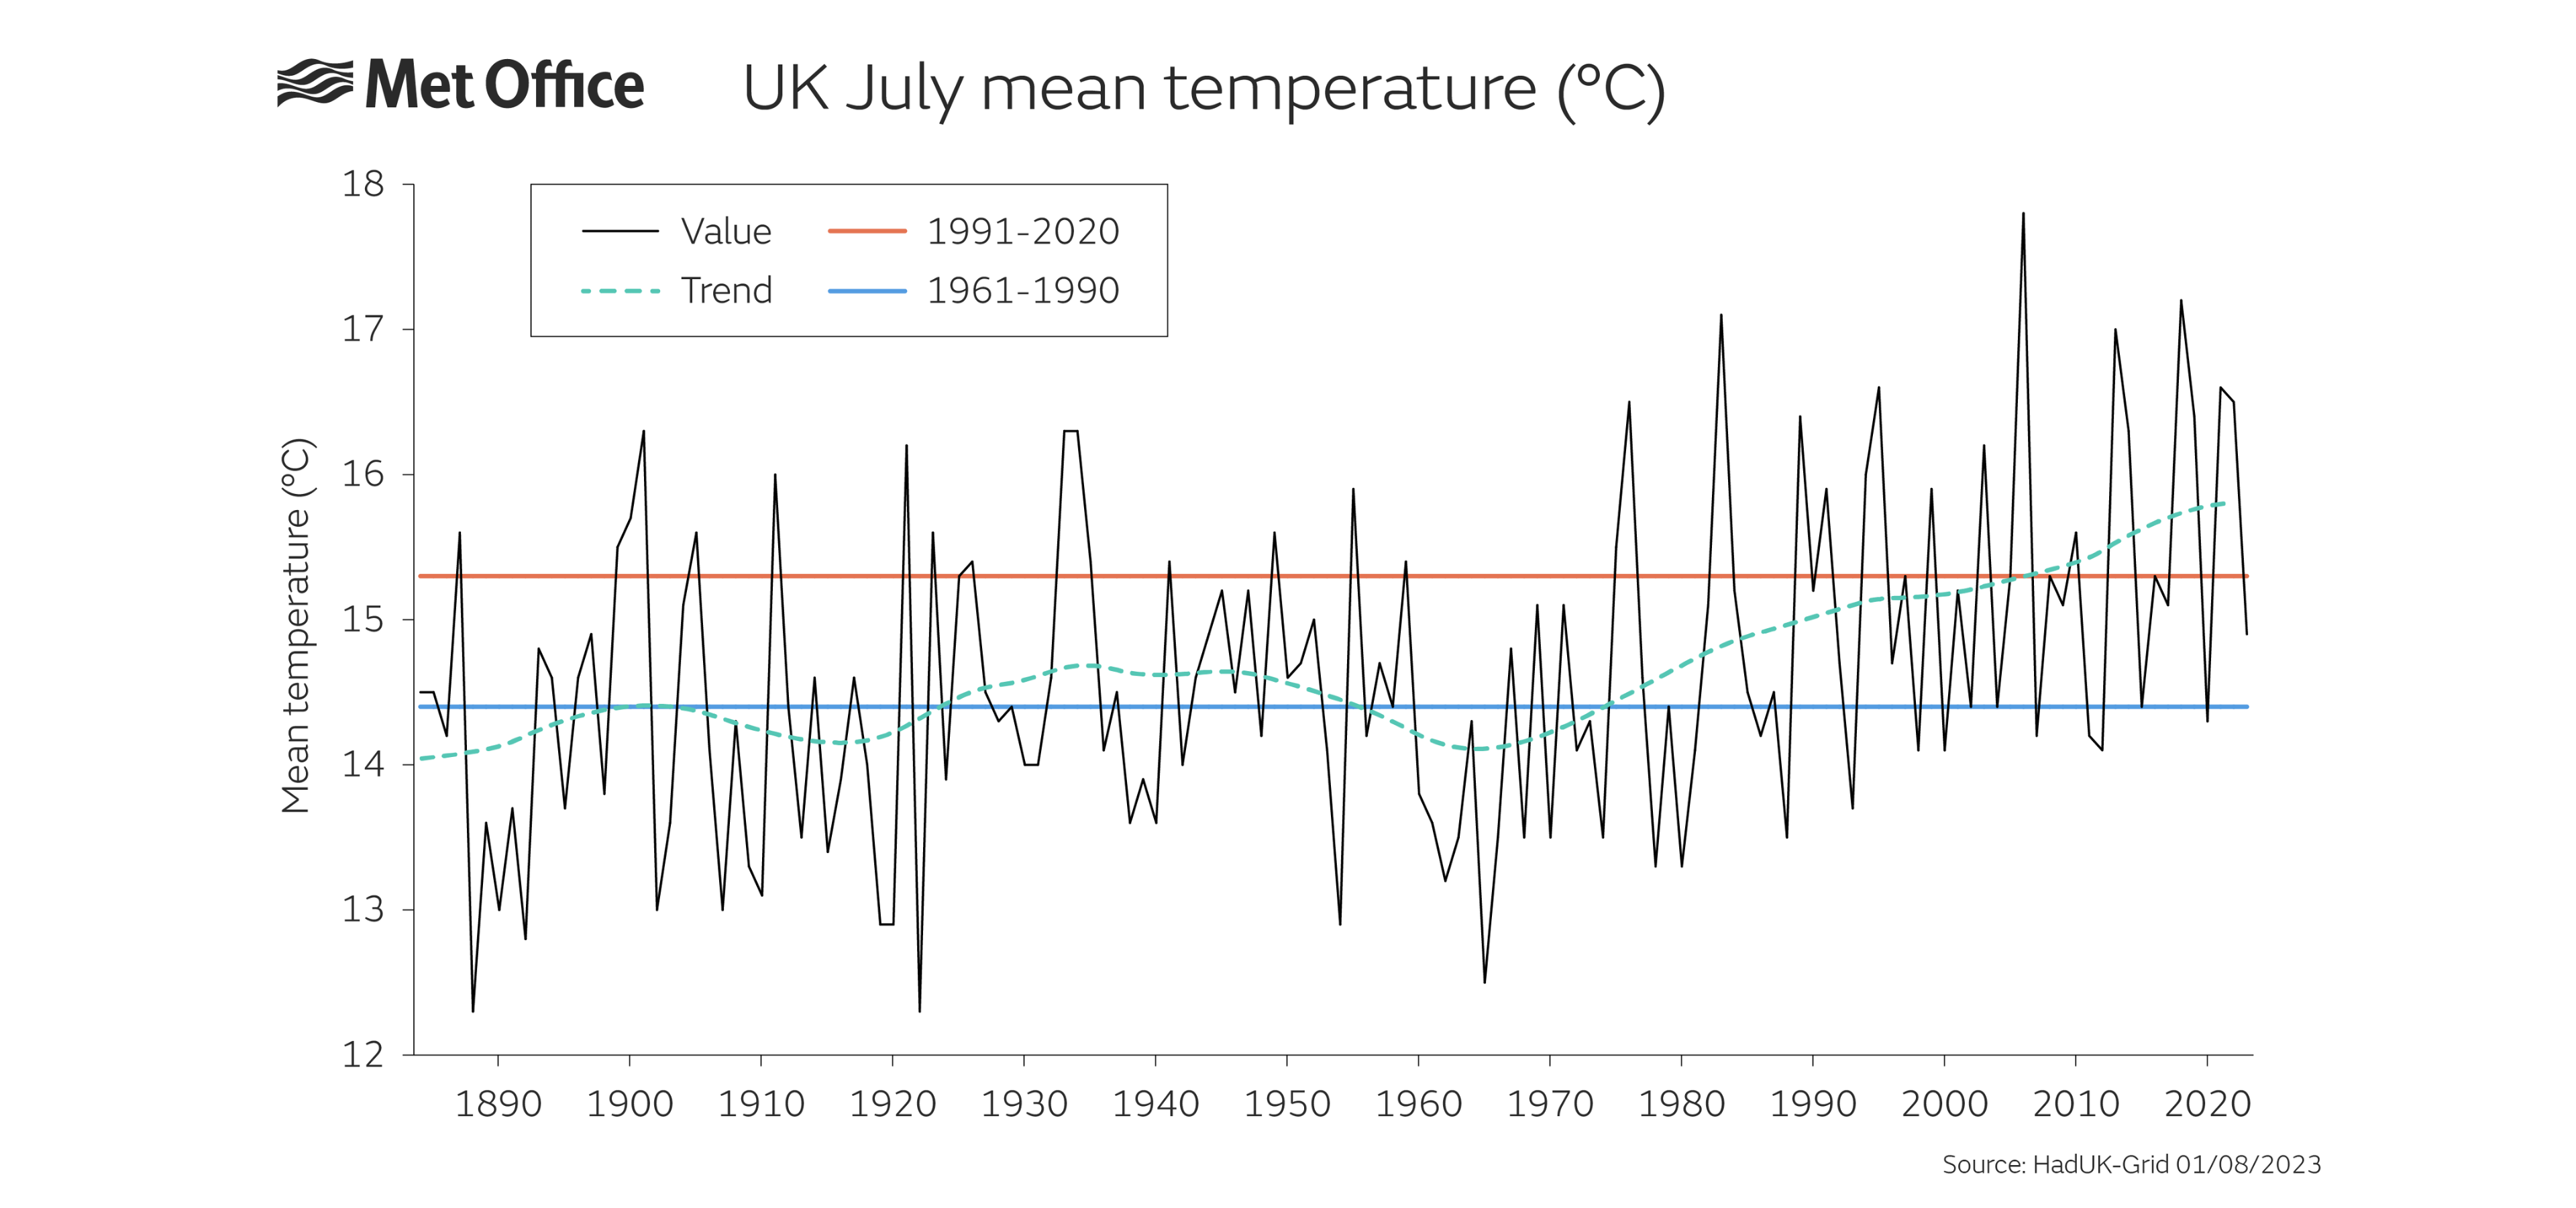 July mean temperature graph shows a general warming trend for the UK in July